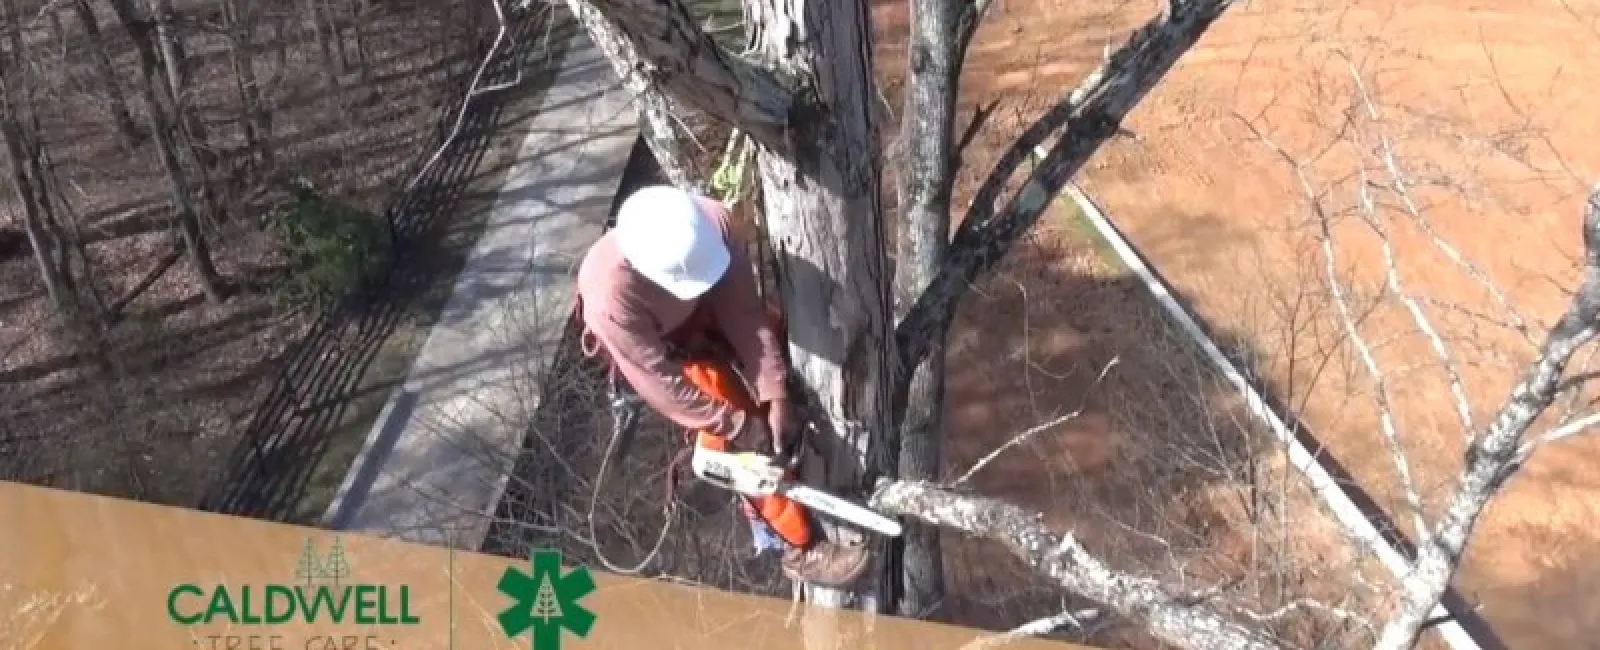 Featured image for “TrustDale includes Caldwell Tree Care in latest episode”